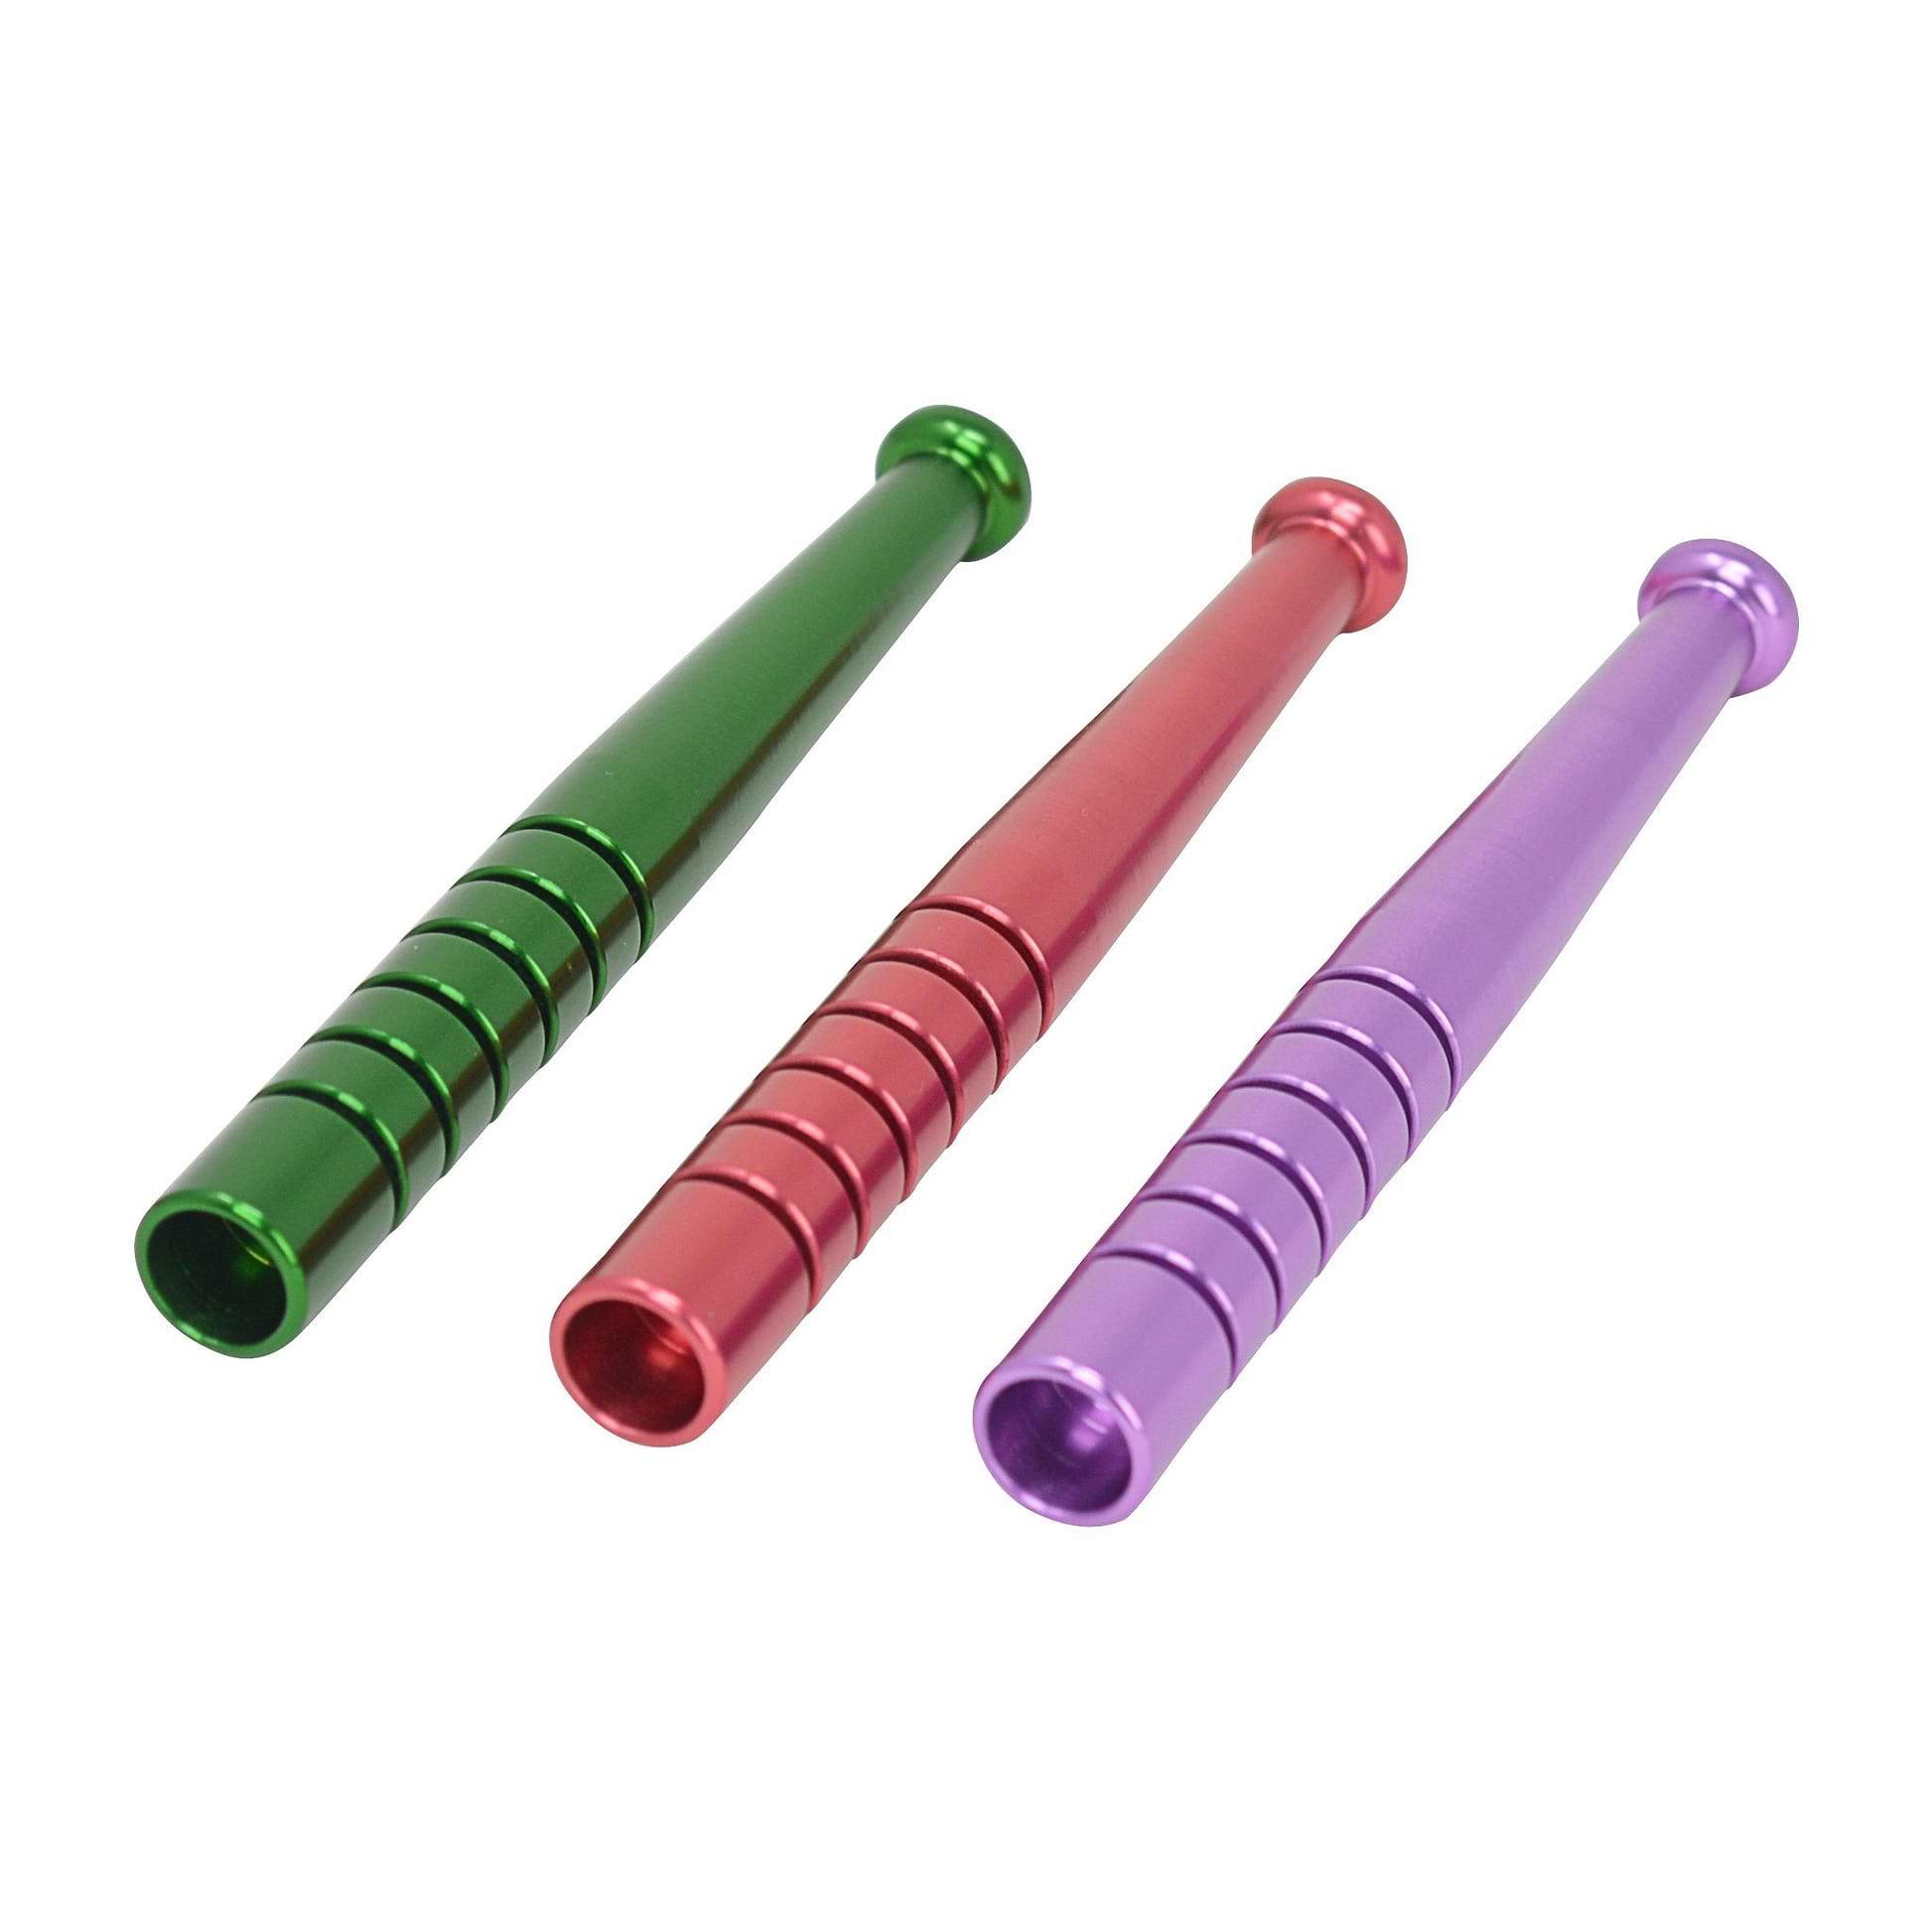 3 colors metal oney little pipe one hitter smoking device with baseball bat design textured ridges